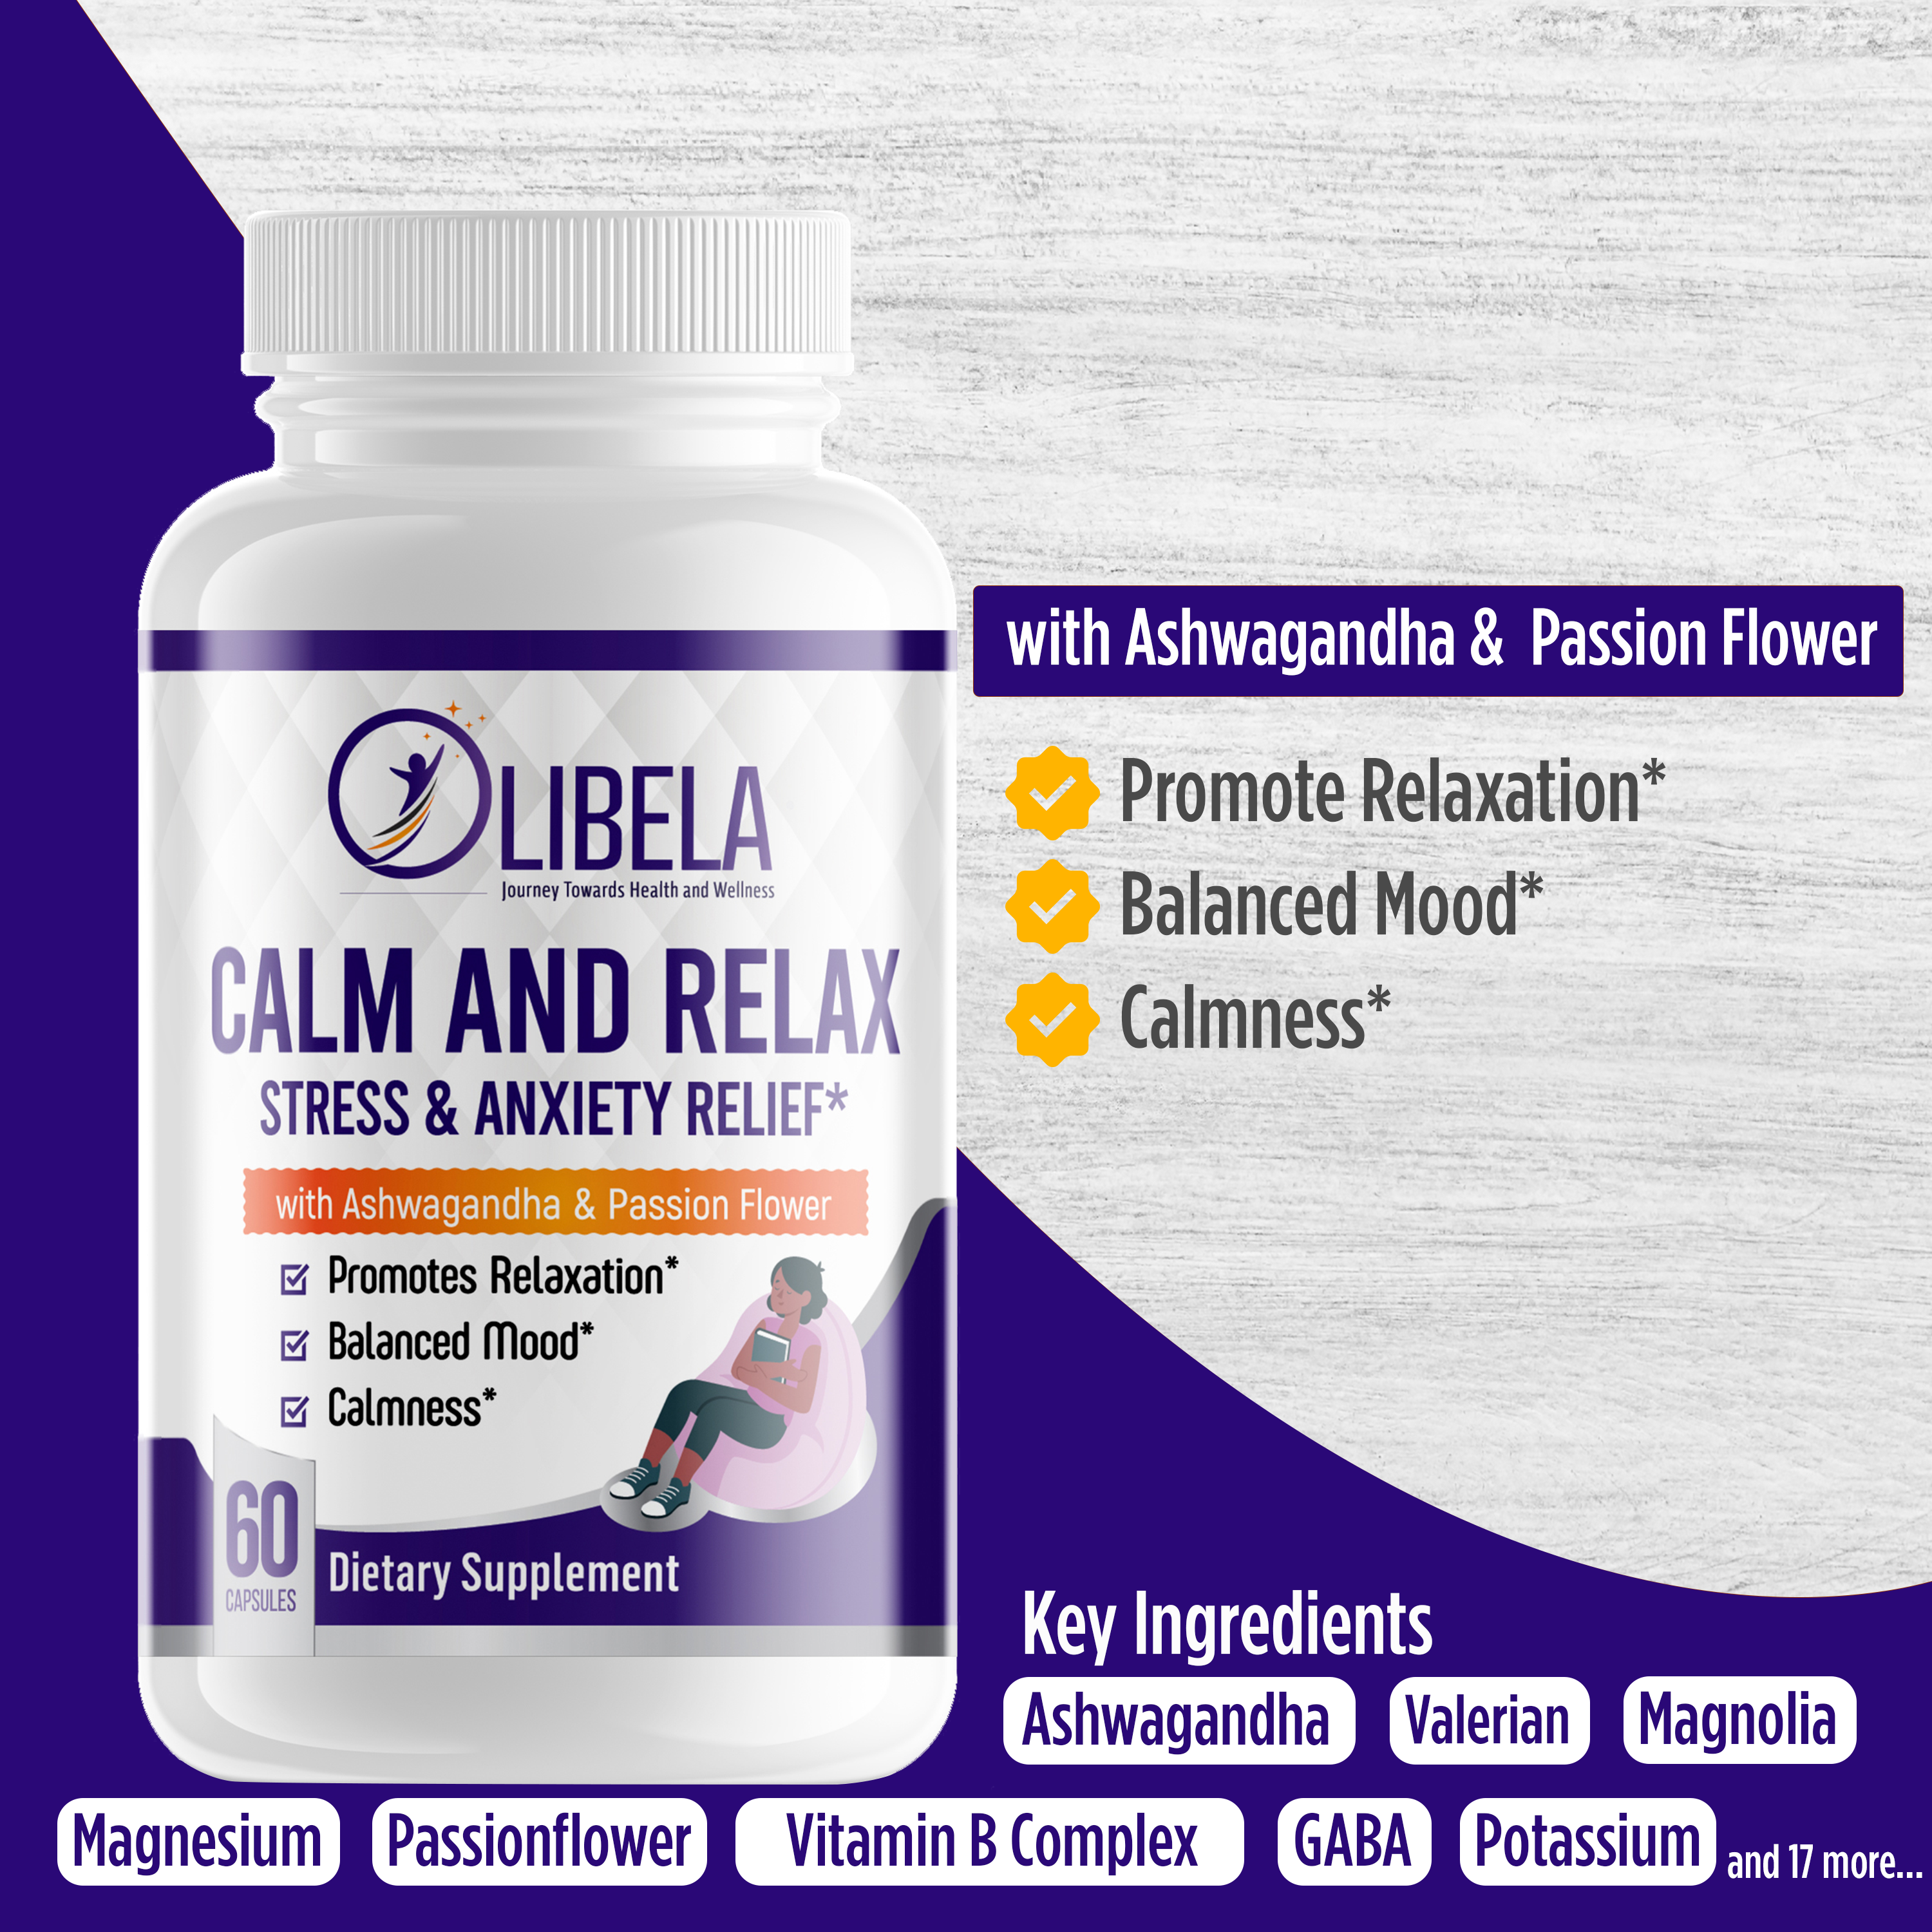 CALM AND RELAX - Stress & Anxiety Relief*. Reduce Anxiety, Healthy Sleep Cycles, Relaxation, Reduce Mental Fatigue And Improve Mood, 60 Caps.